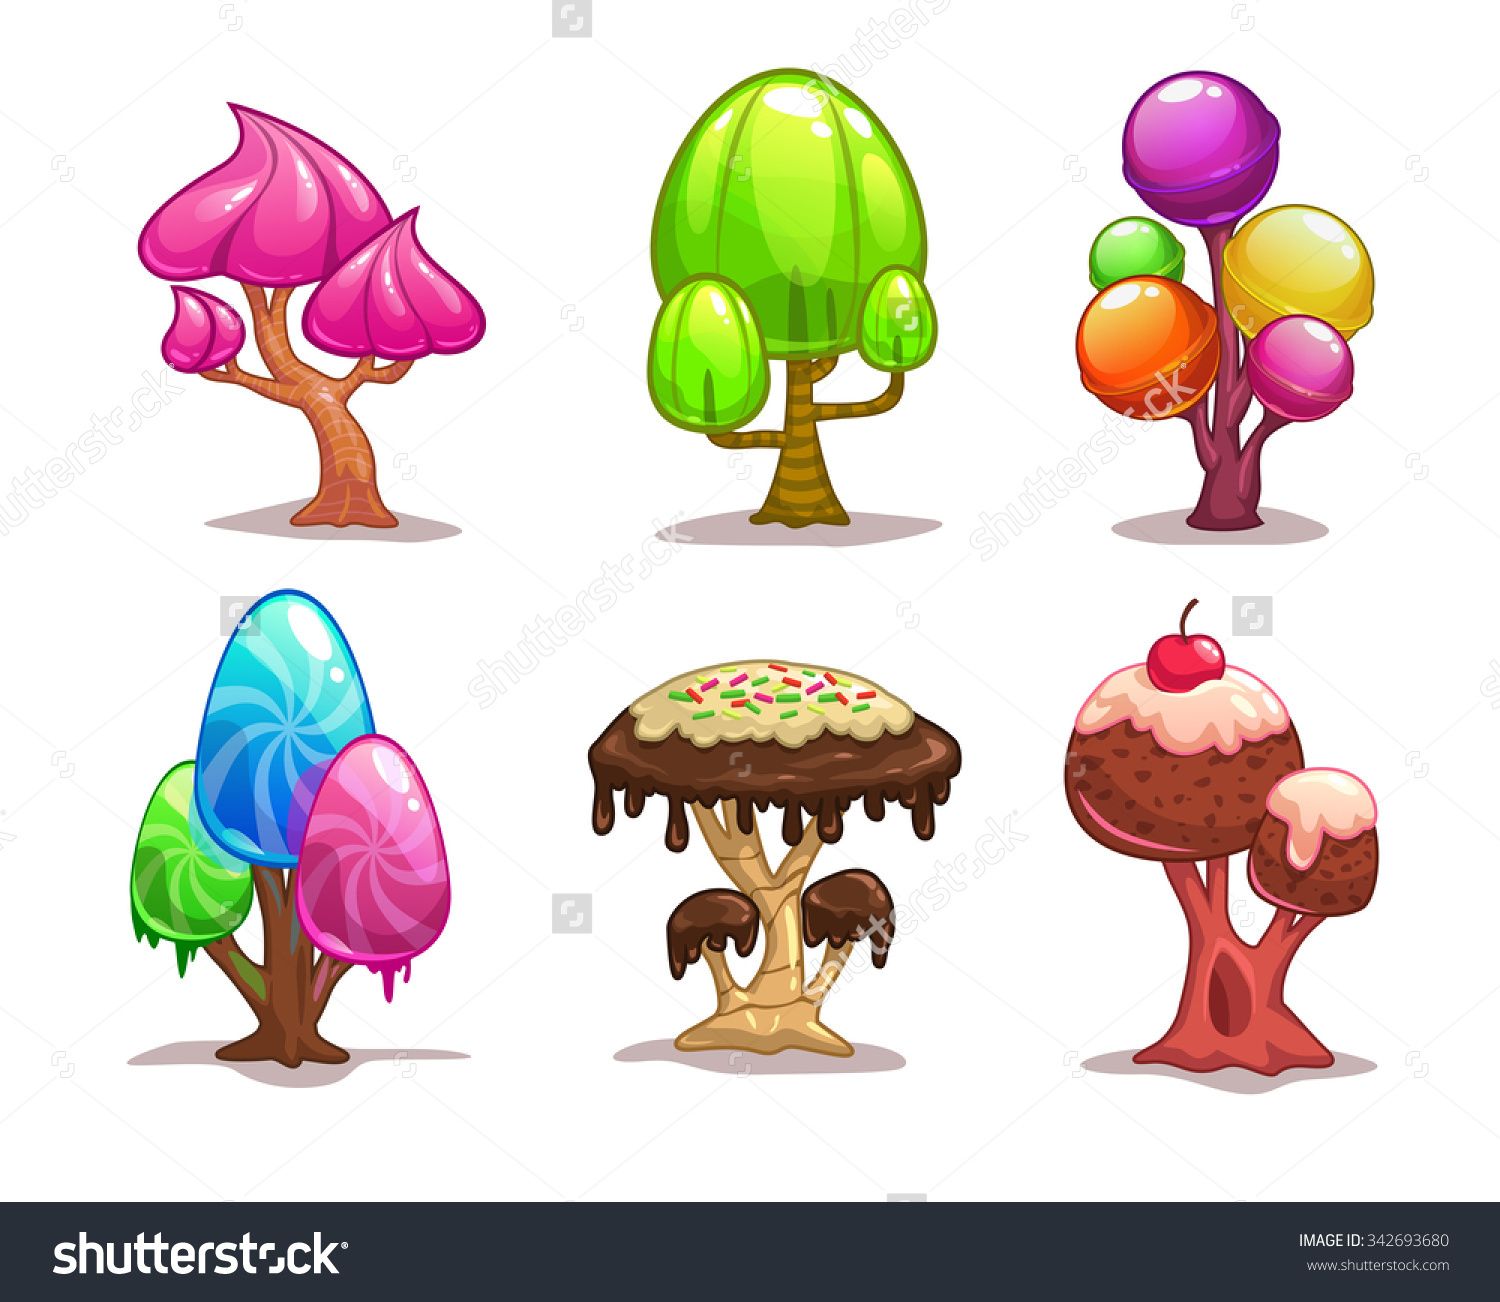 clipart candy tree